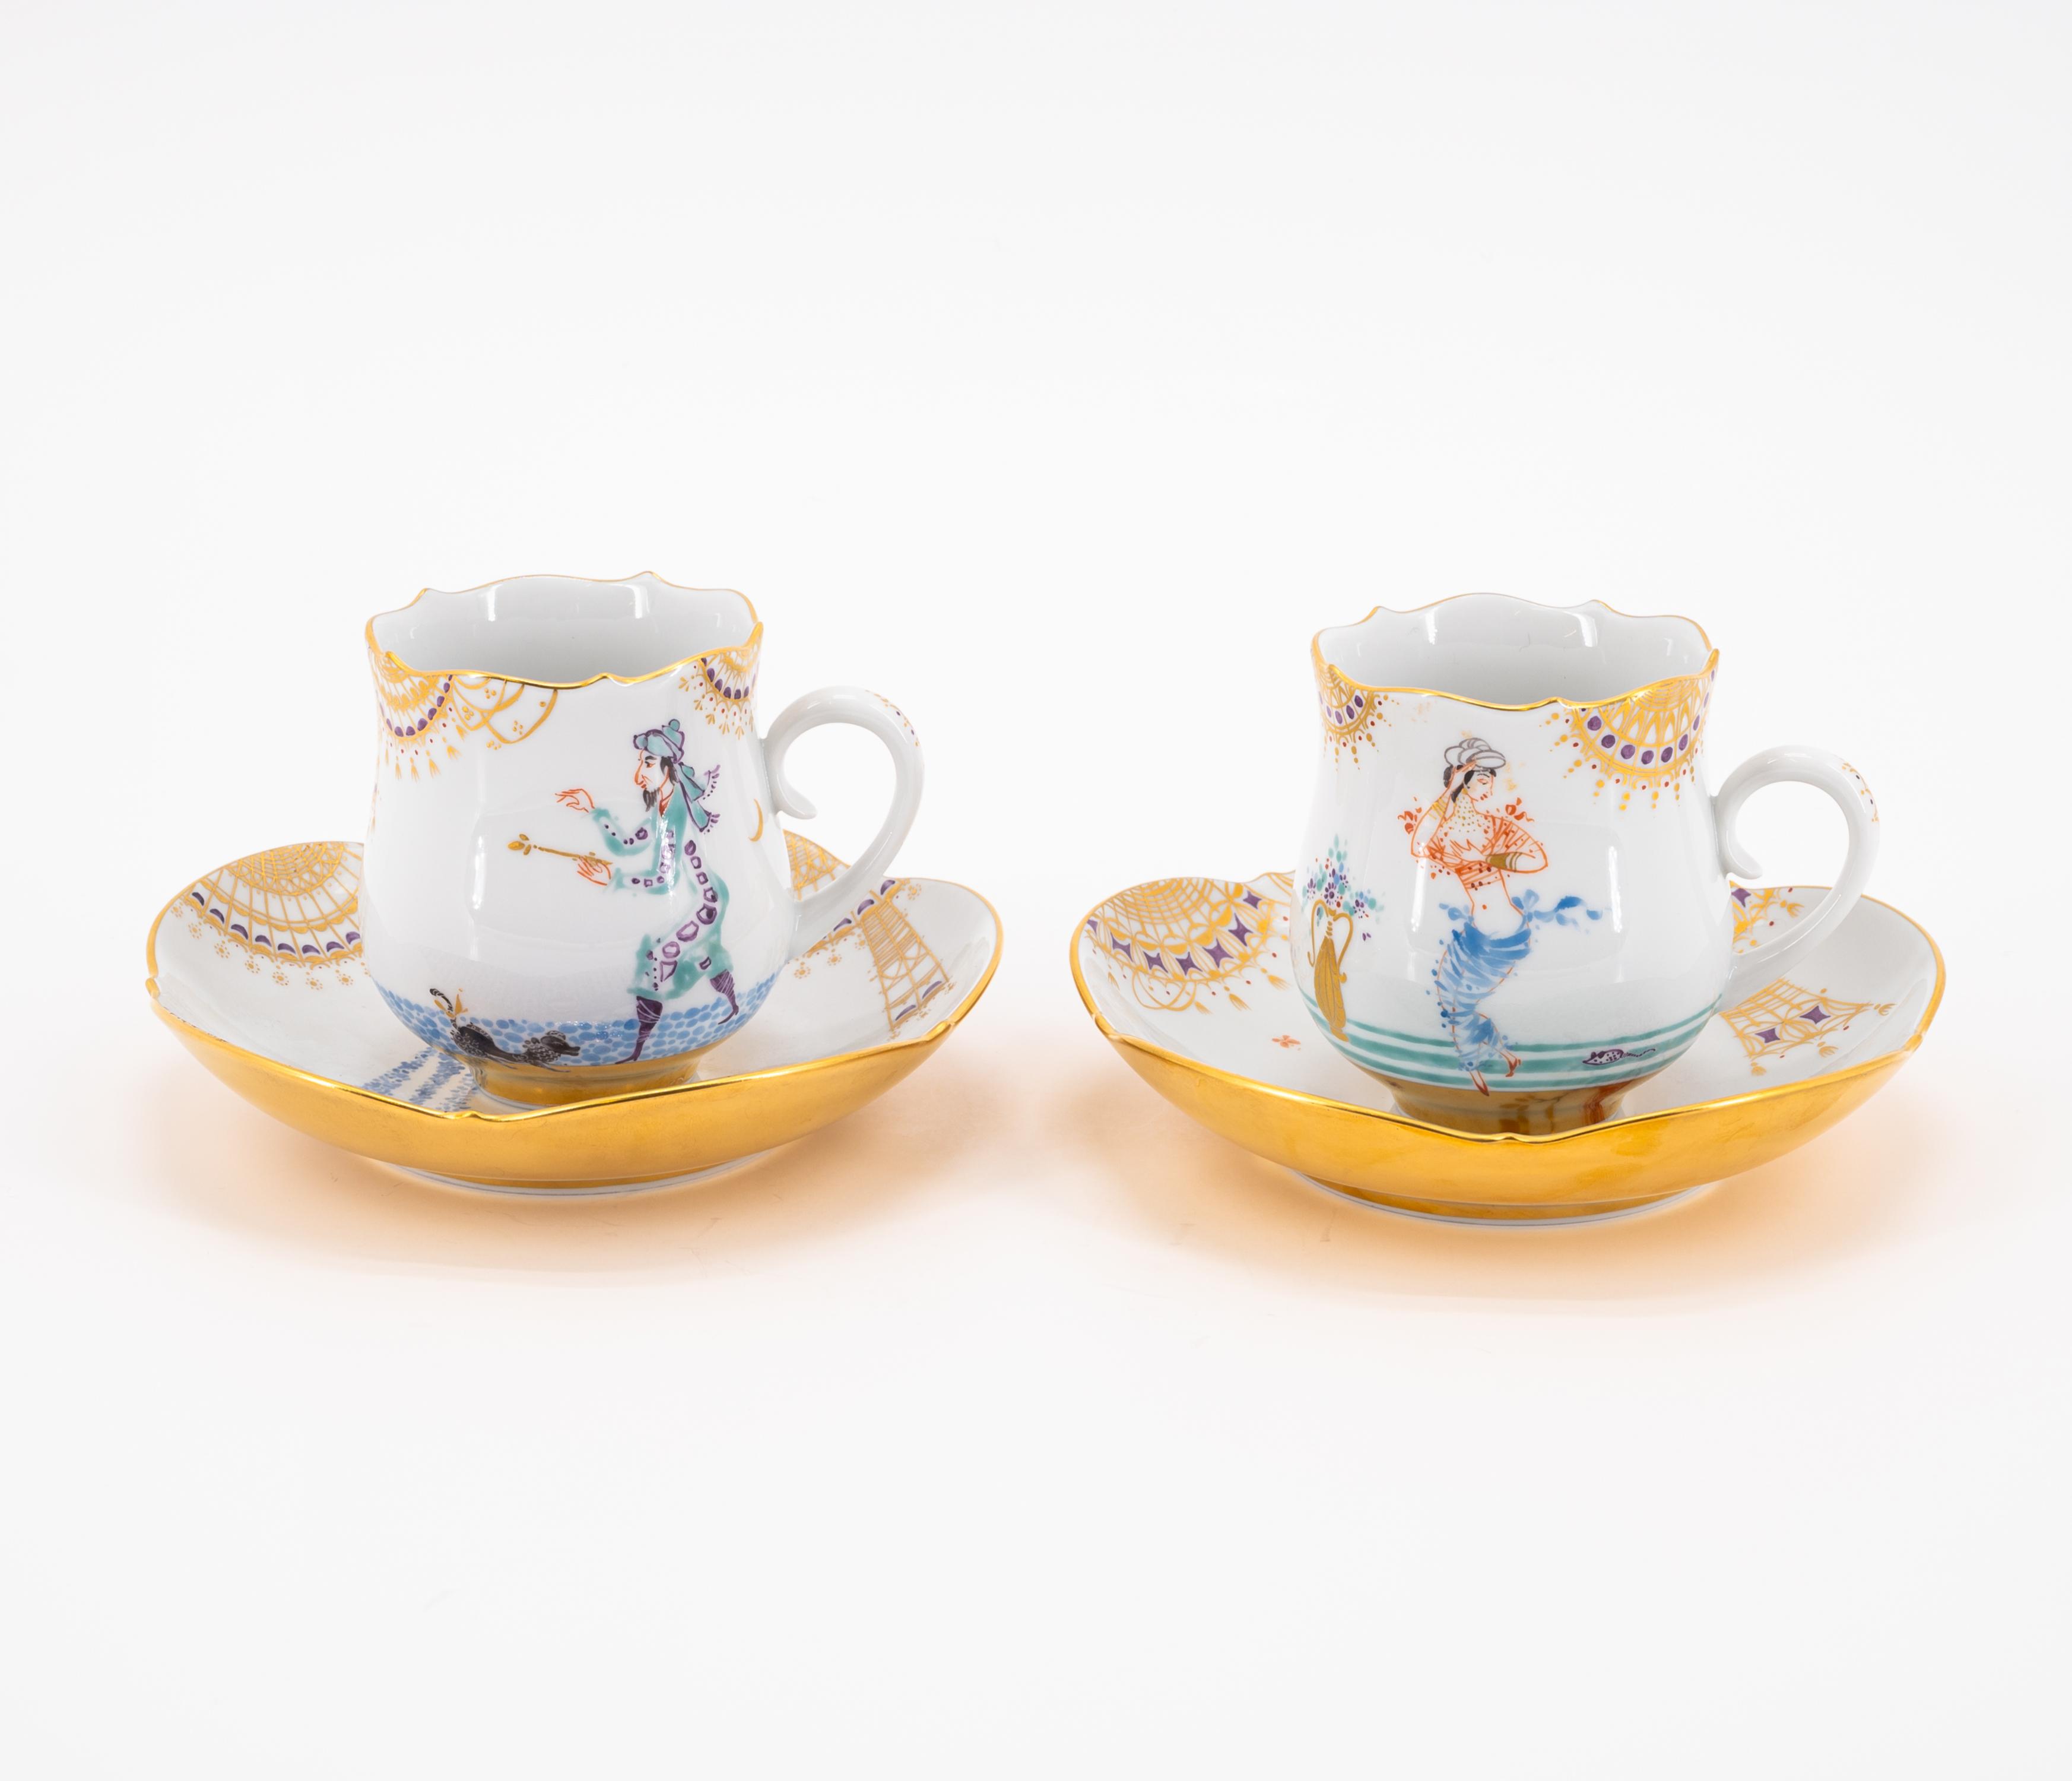 LARGE PORCELAIN COFFEE SERVICE WITH '1001 NIGHTS' DECOR FOR 12 PEOPLE - Image 7 of 19